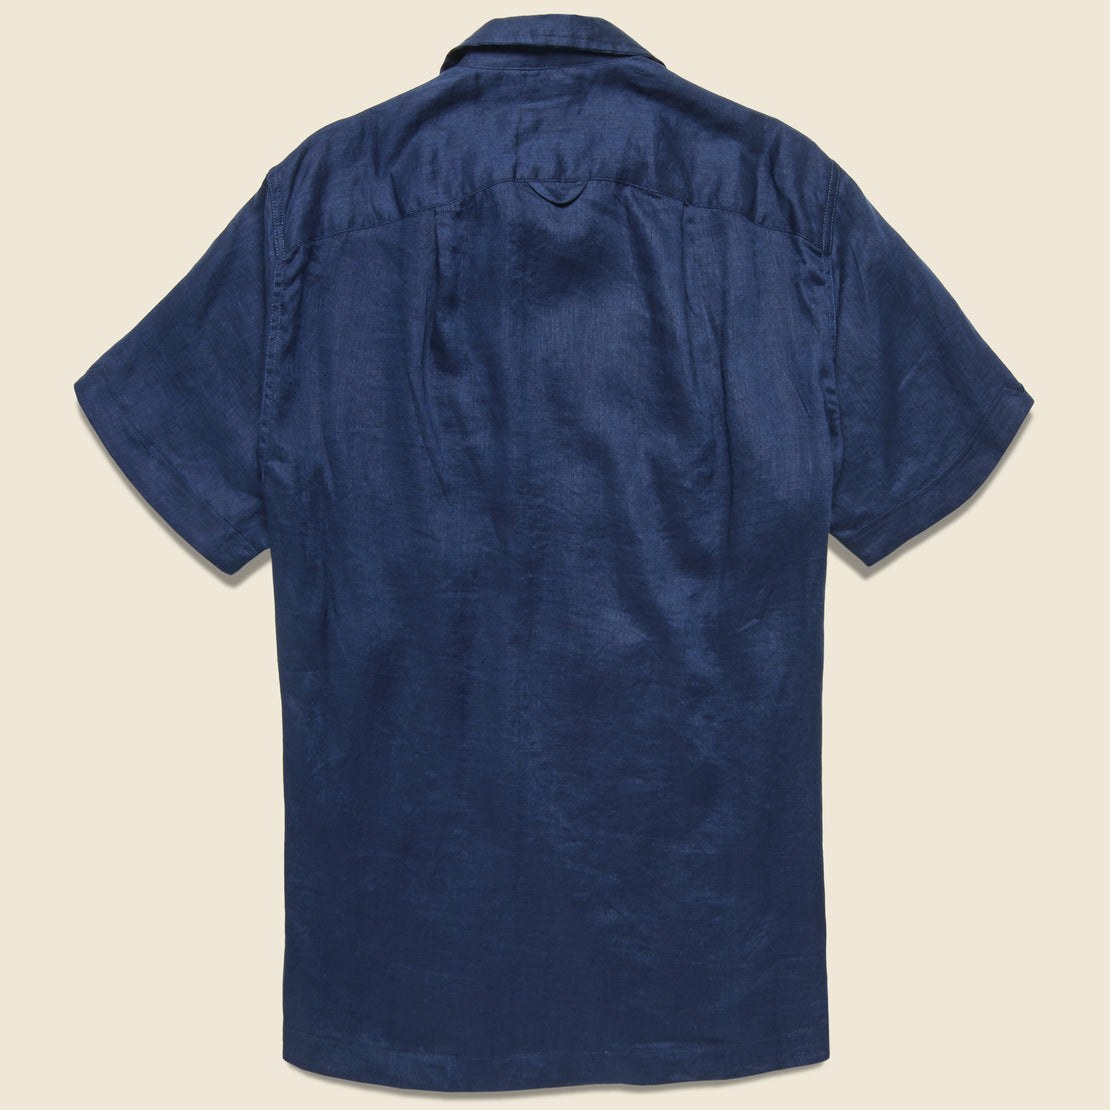 Vacation Shirt - Navy - Monitaly - STAG Provisions - Tops - S/S Woven - Solid